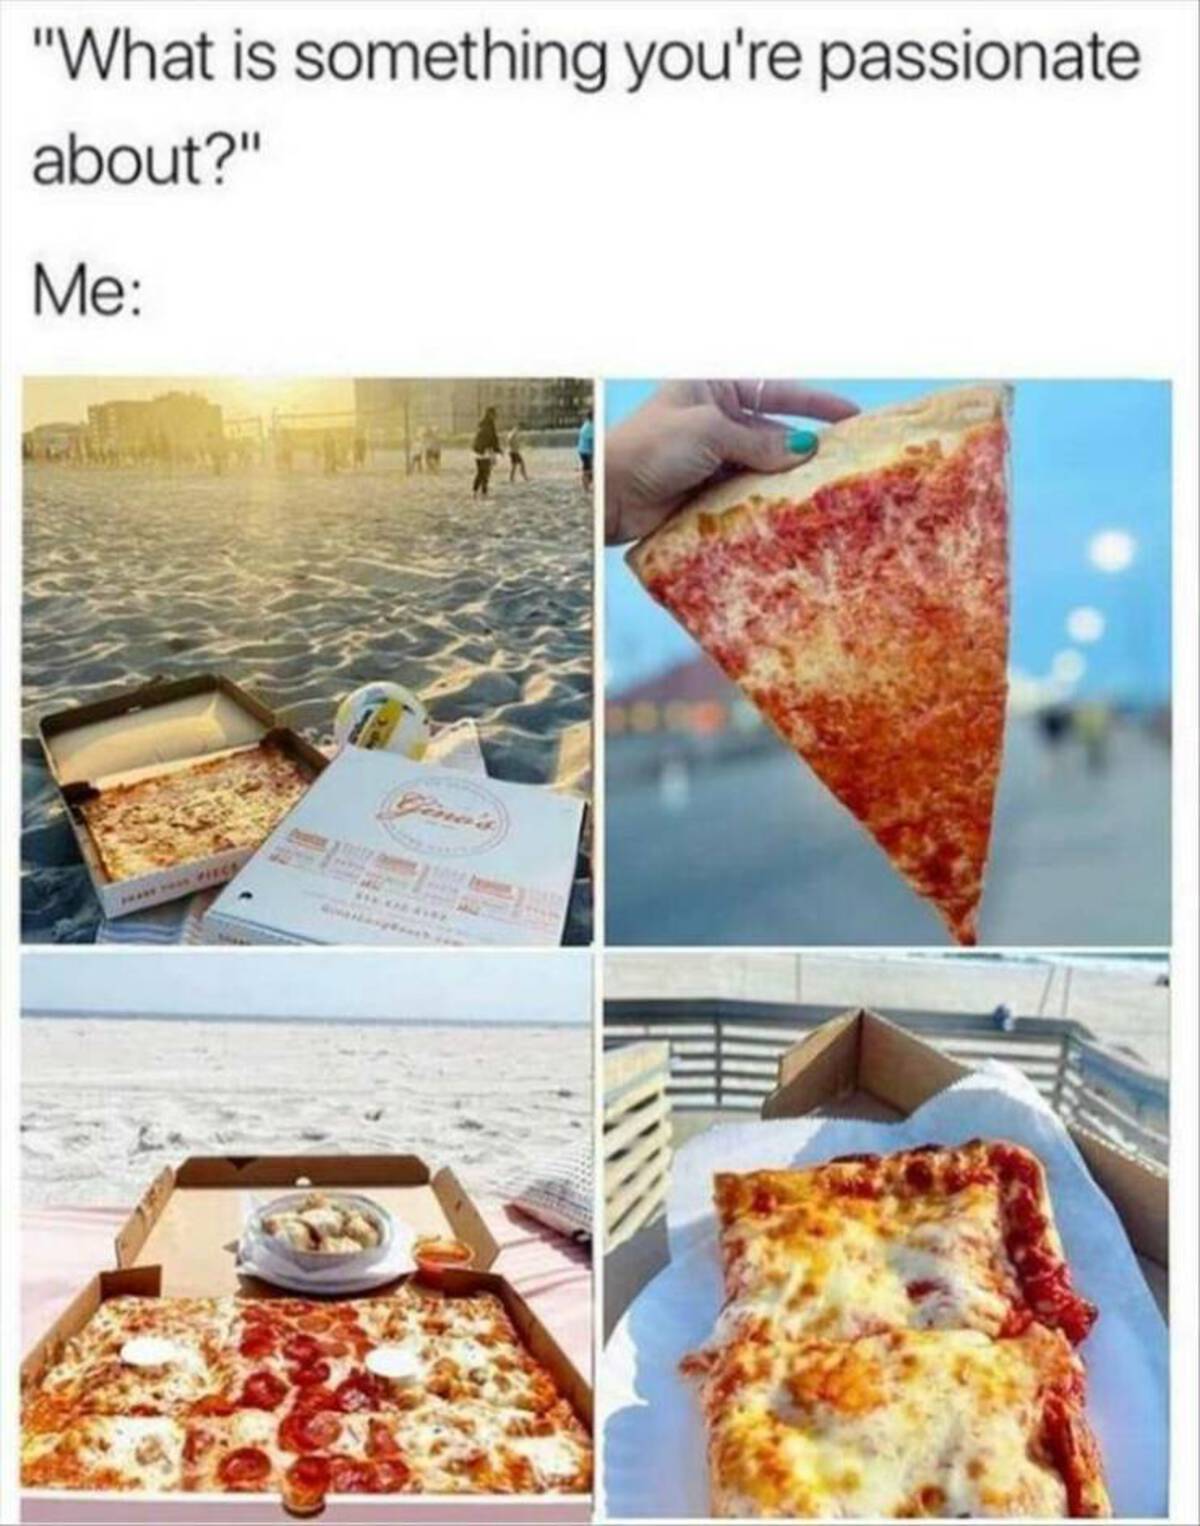 Pizza - "What is something you're passionate about?" Me